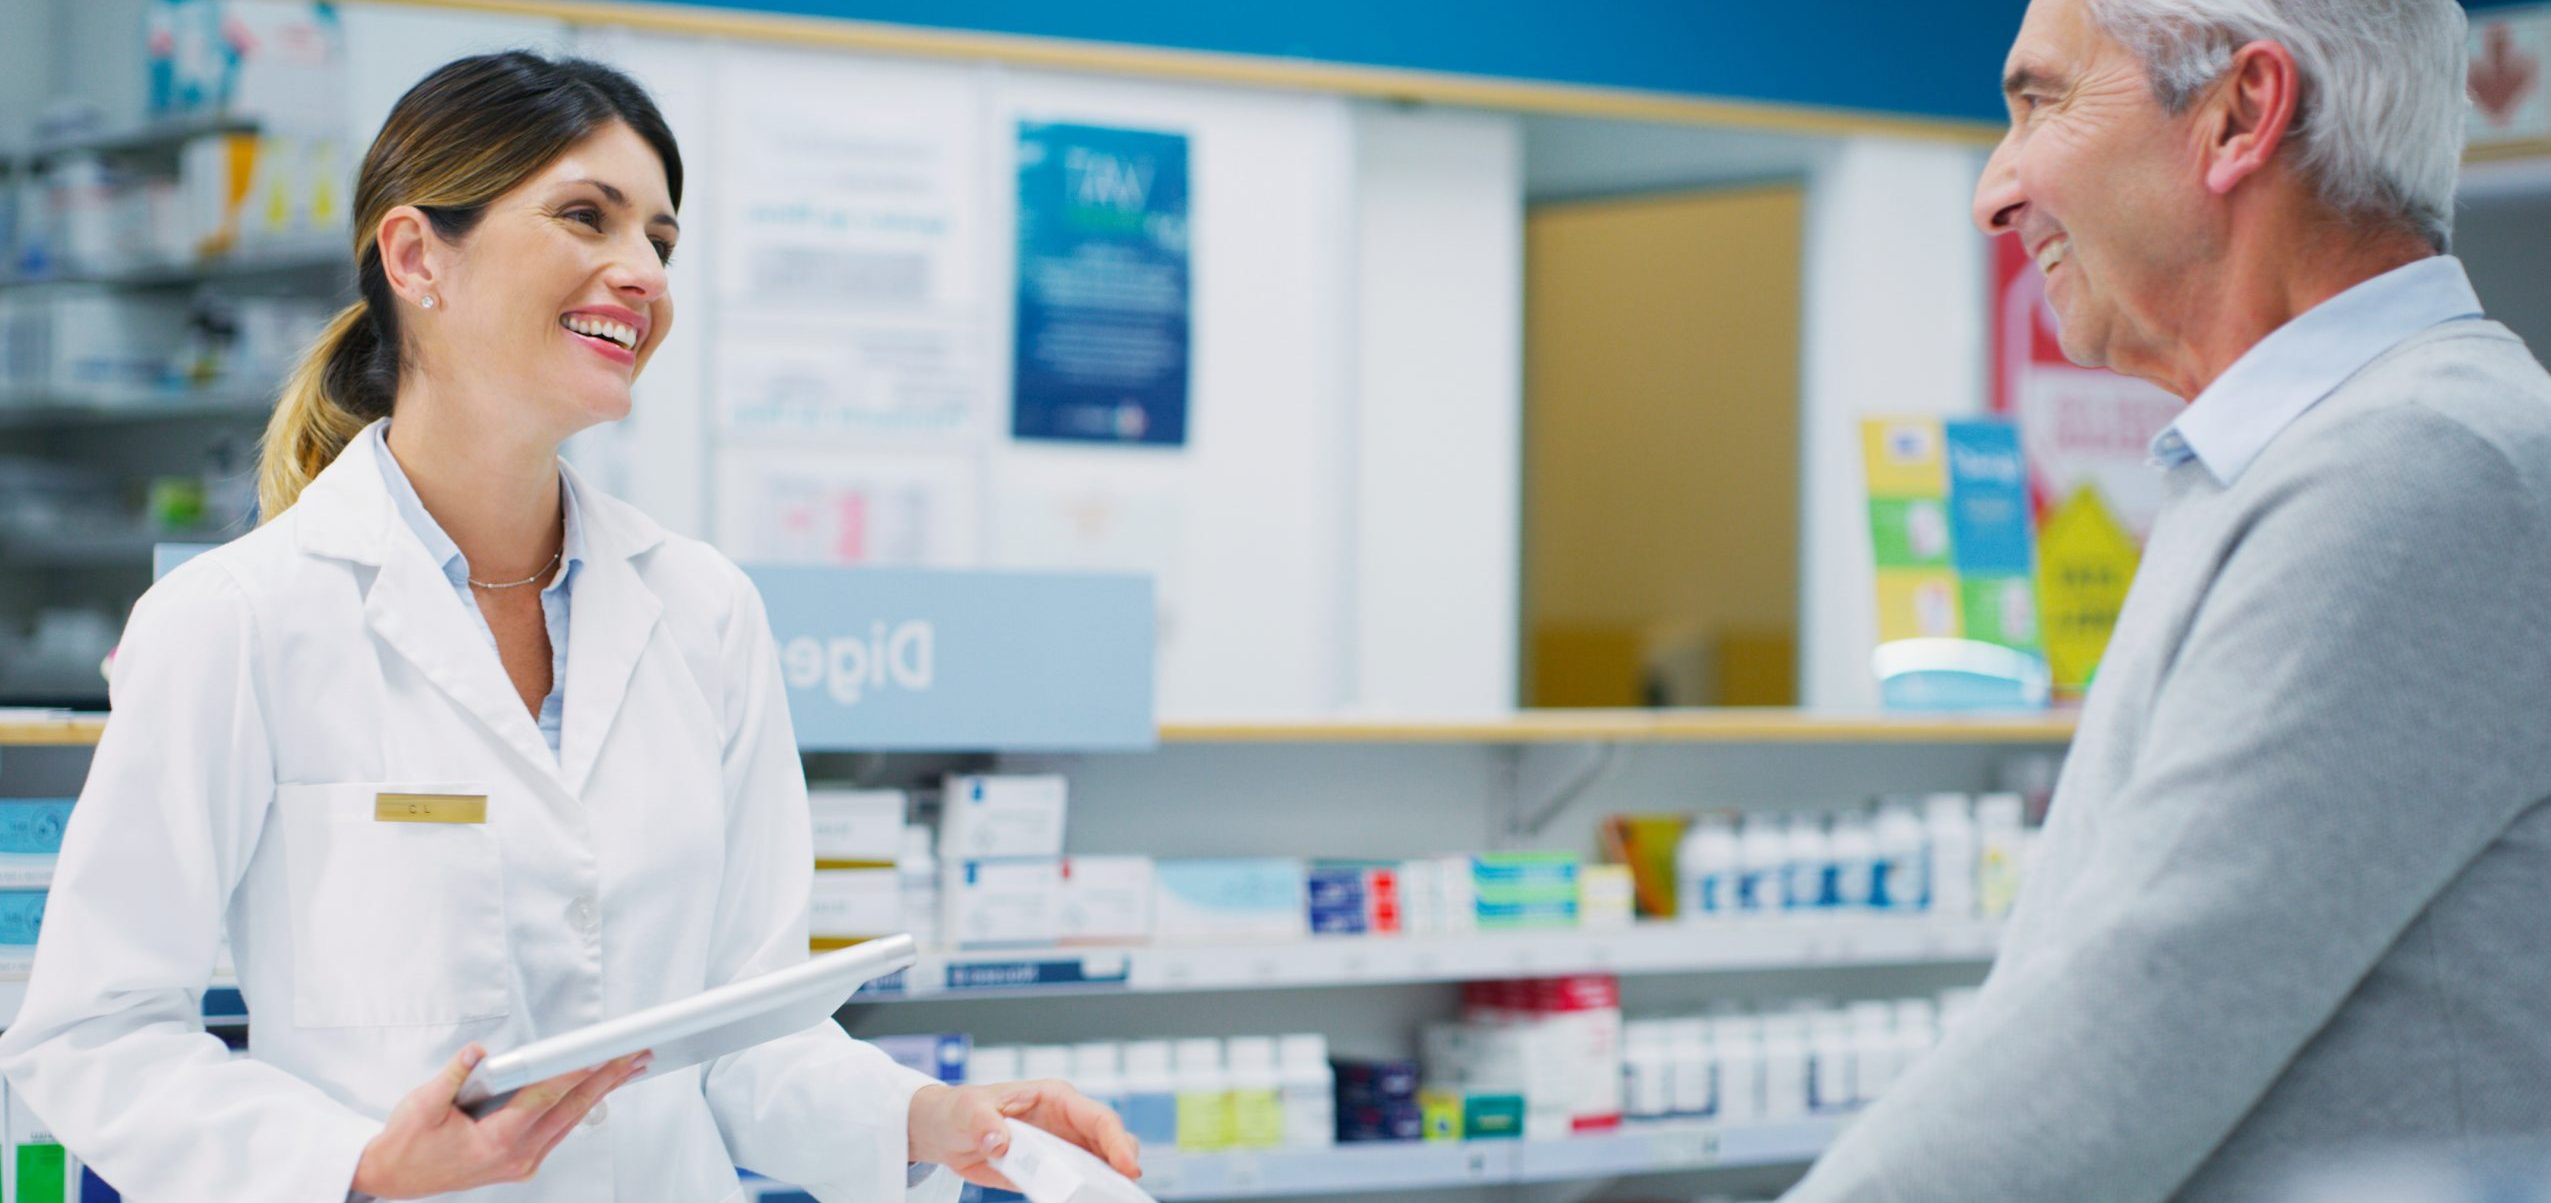 Shot of a pharmacist assisting a customer in a chemist.